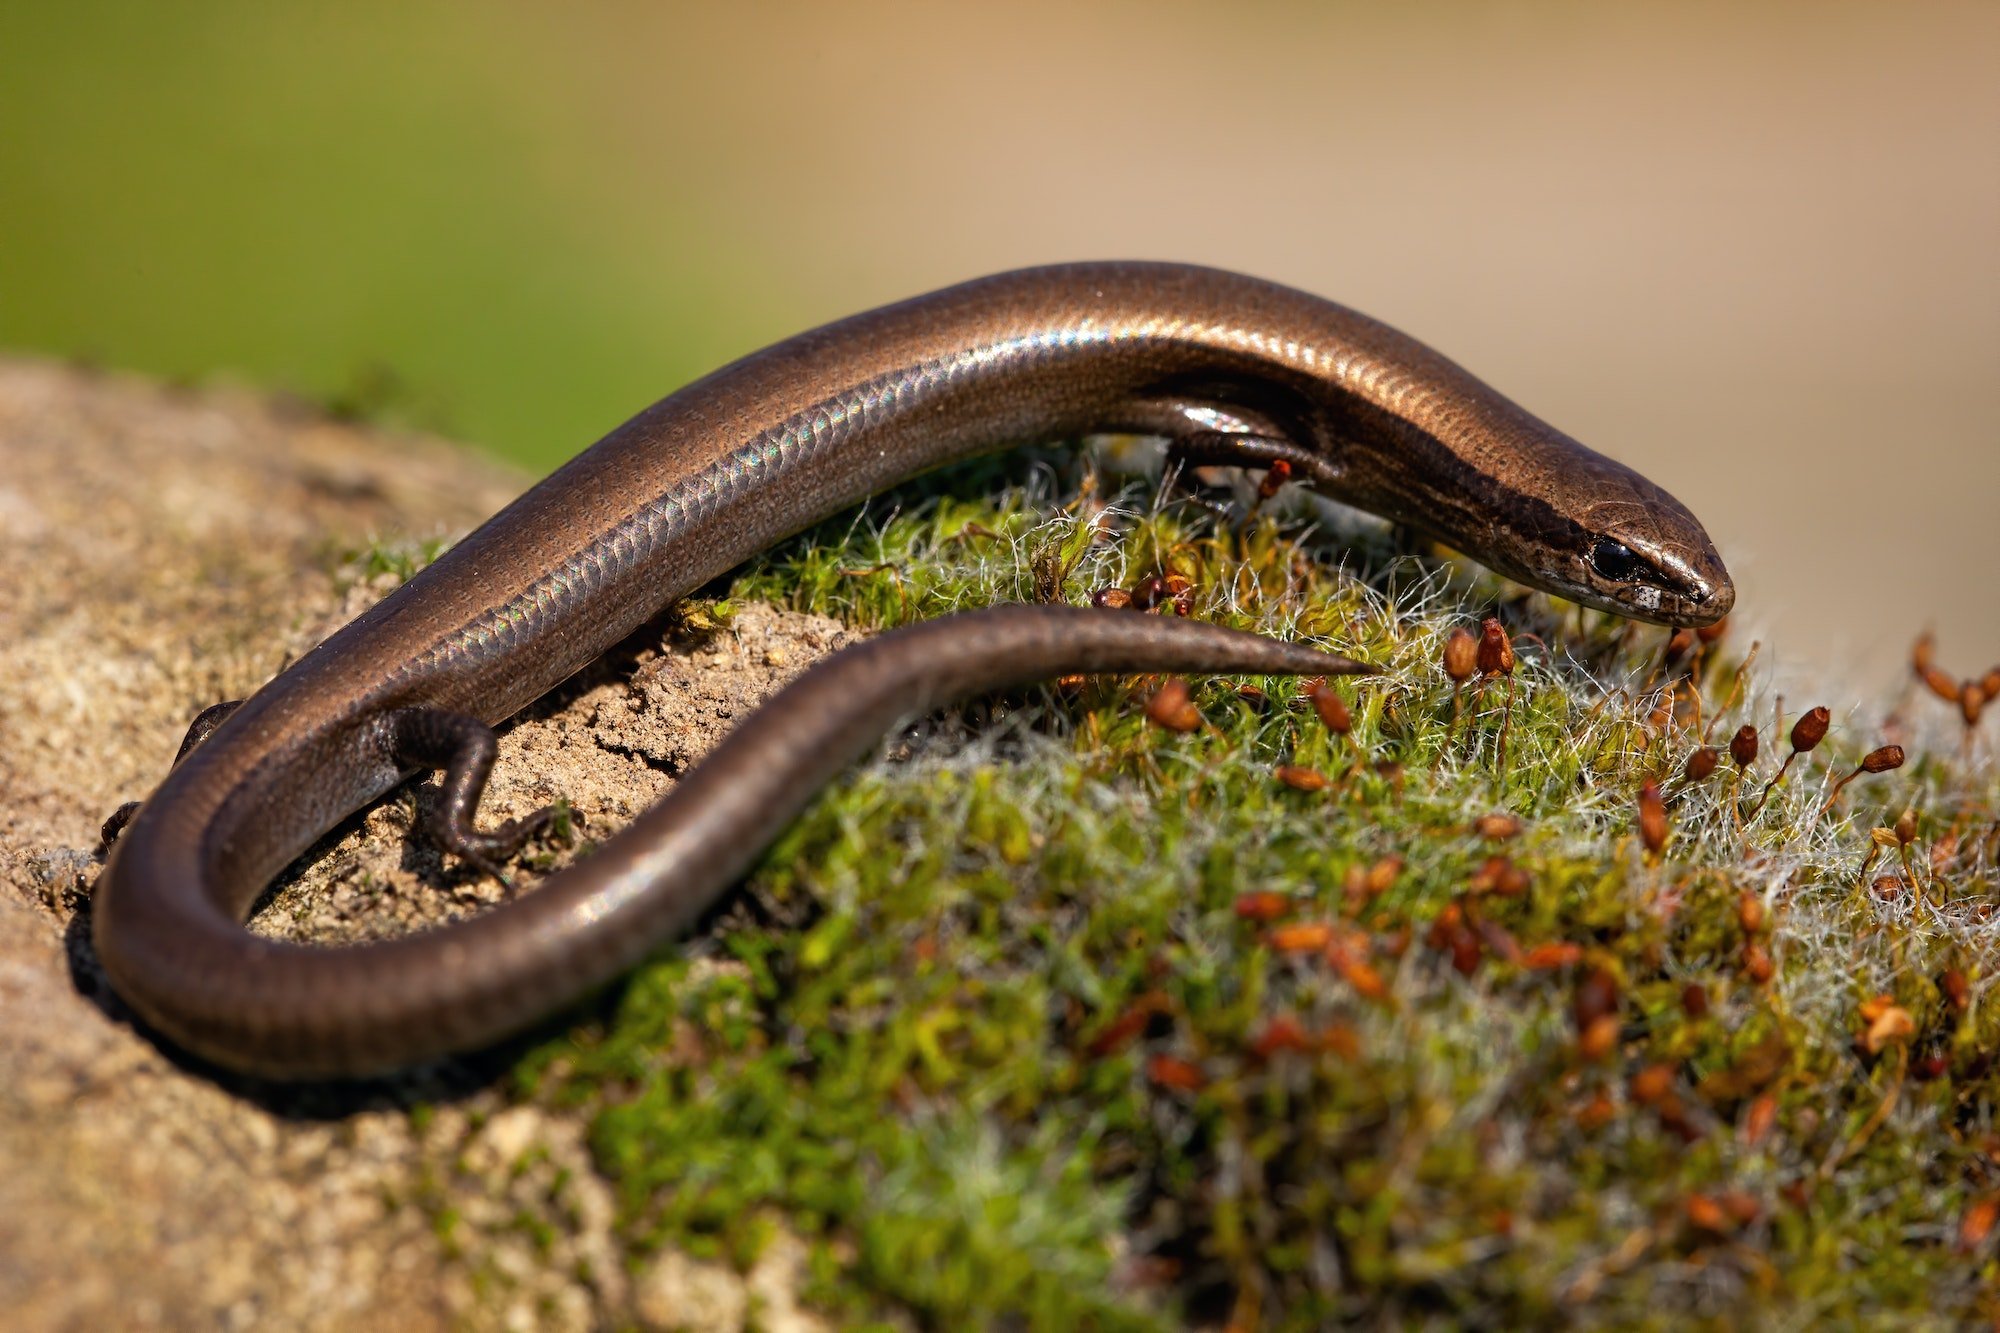 European copper skink, ablepharus kitaibelii, on a green moss in nature